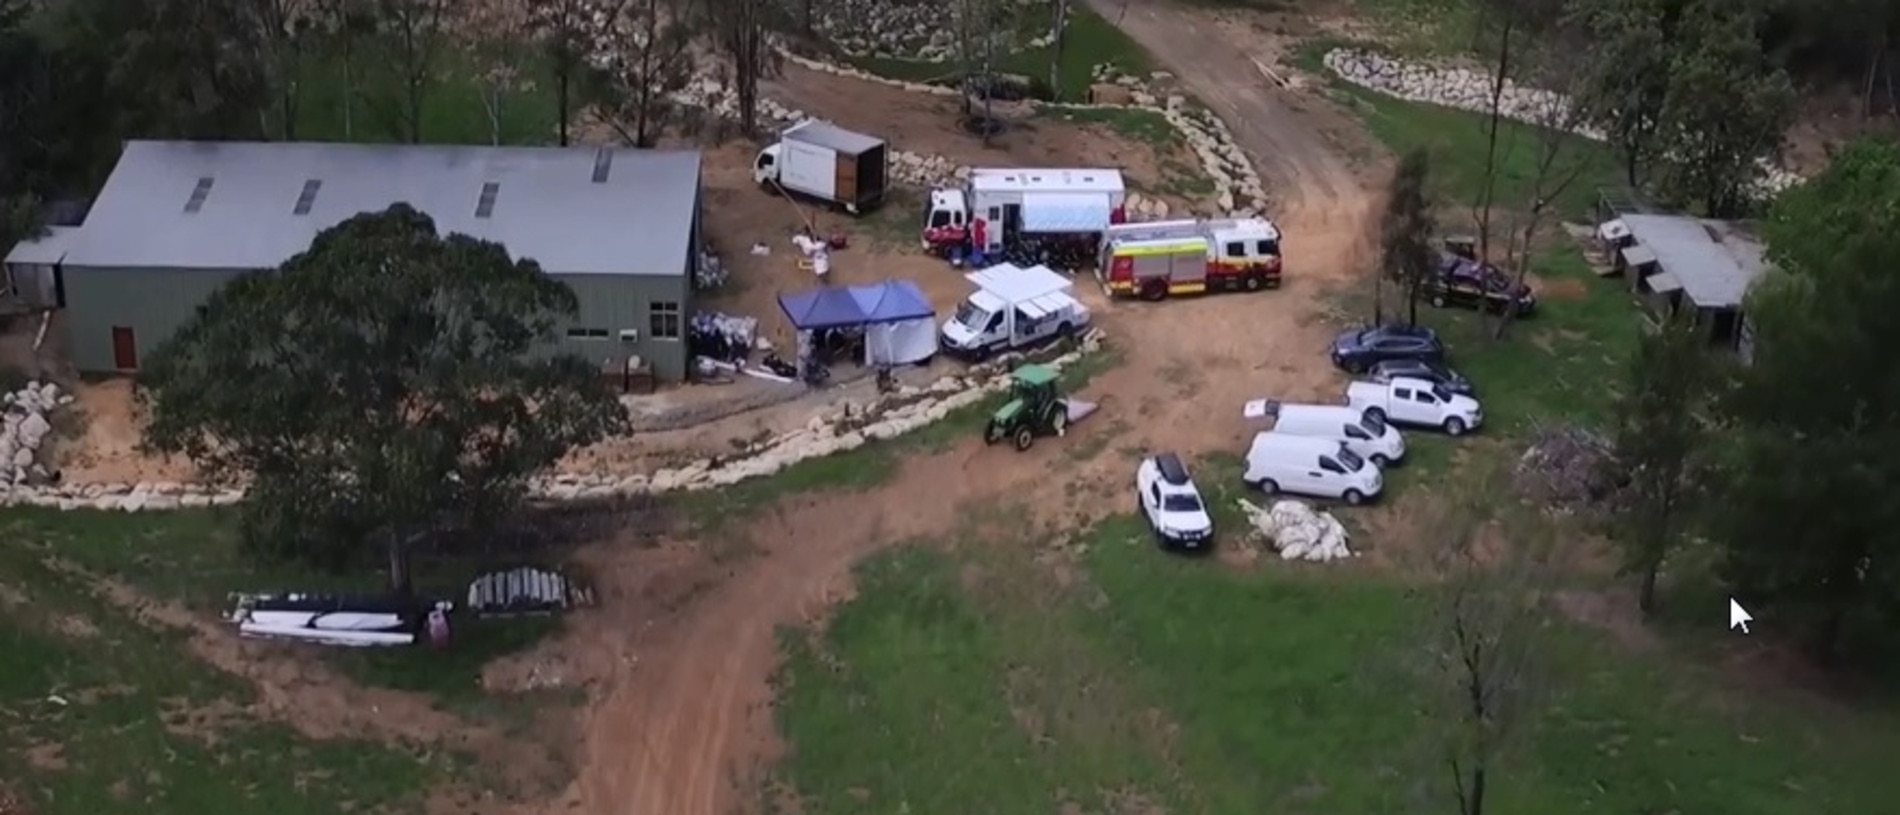 The Mt Hunter property was locked down by emergency services during the raid. Picture: NSW Police